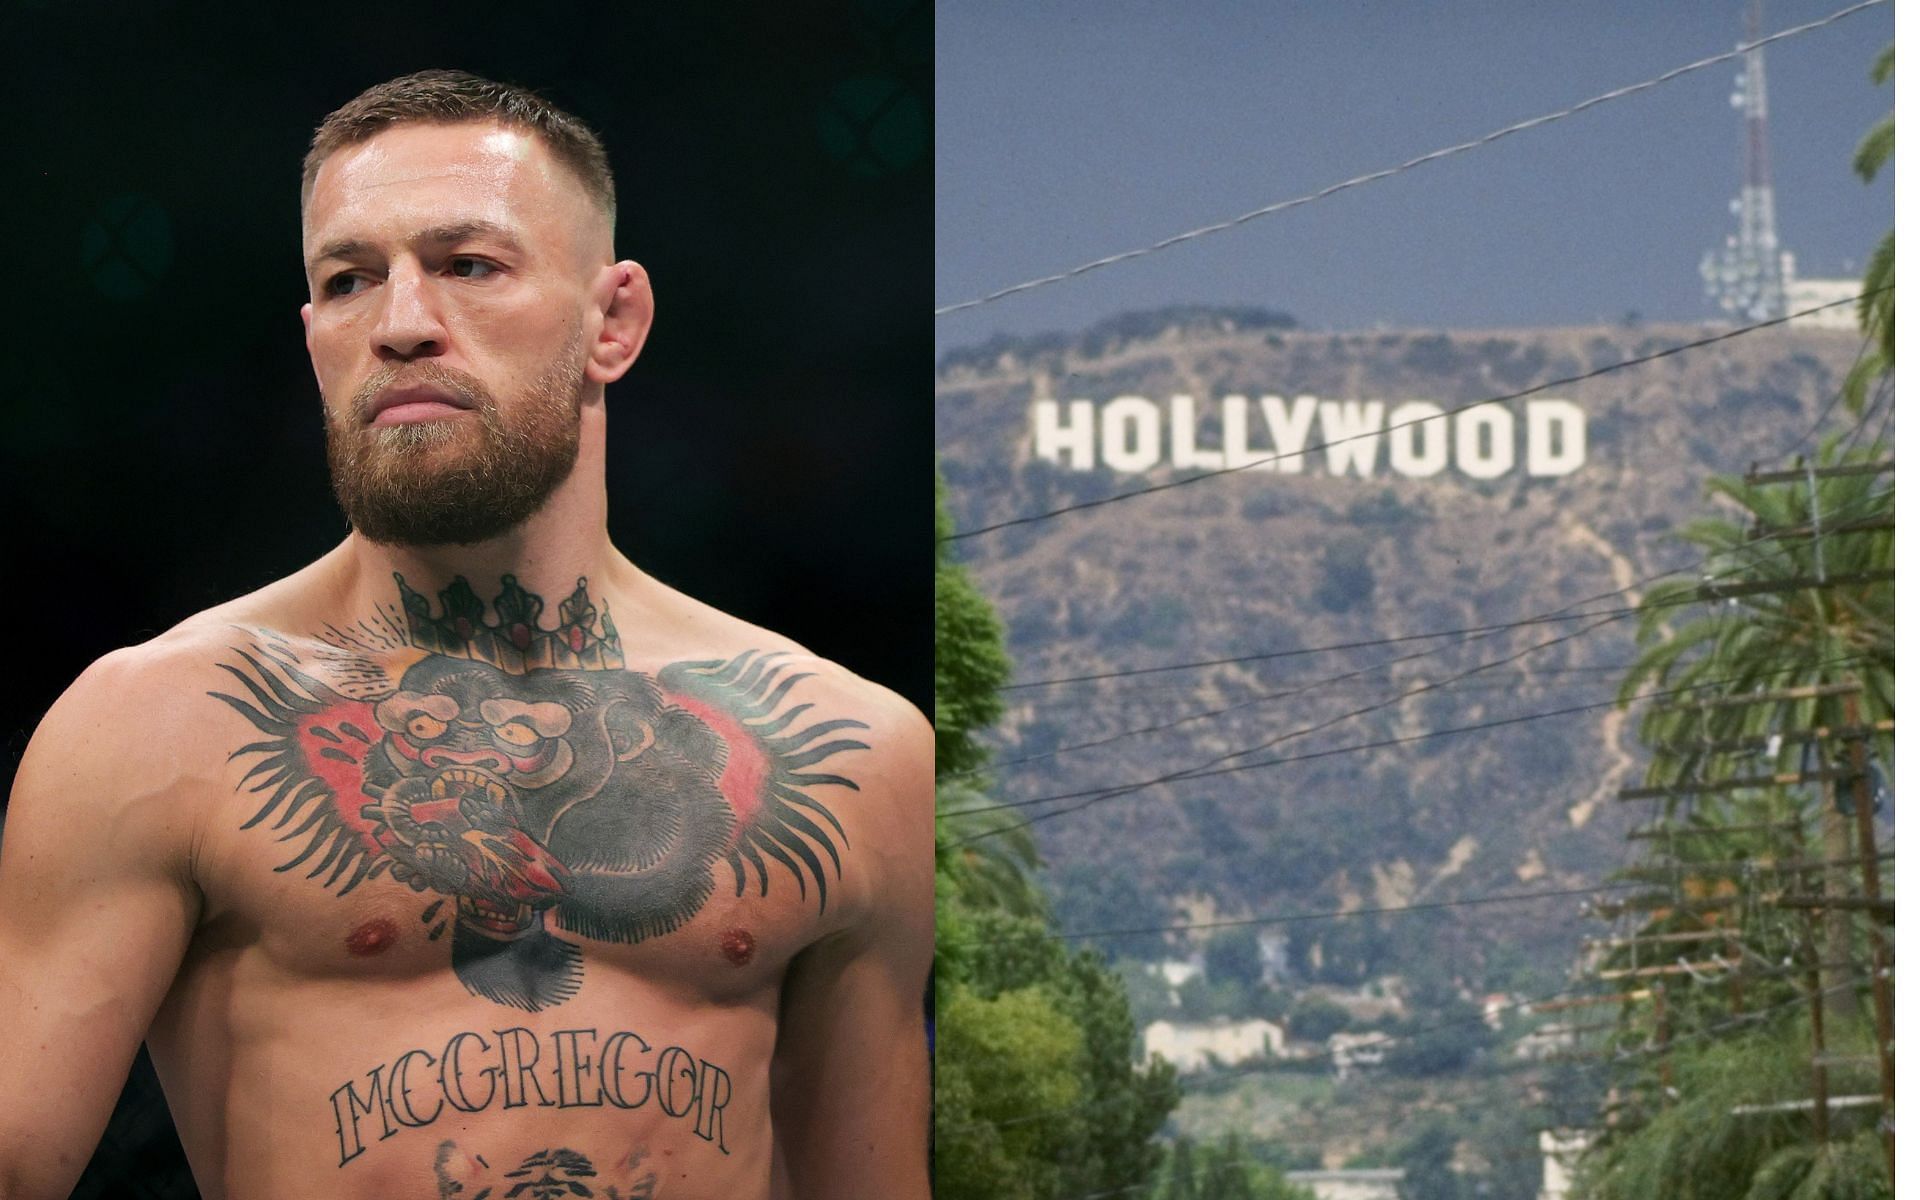 Conor McGregor will be making his Hollywood debut